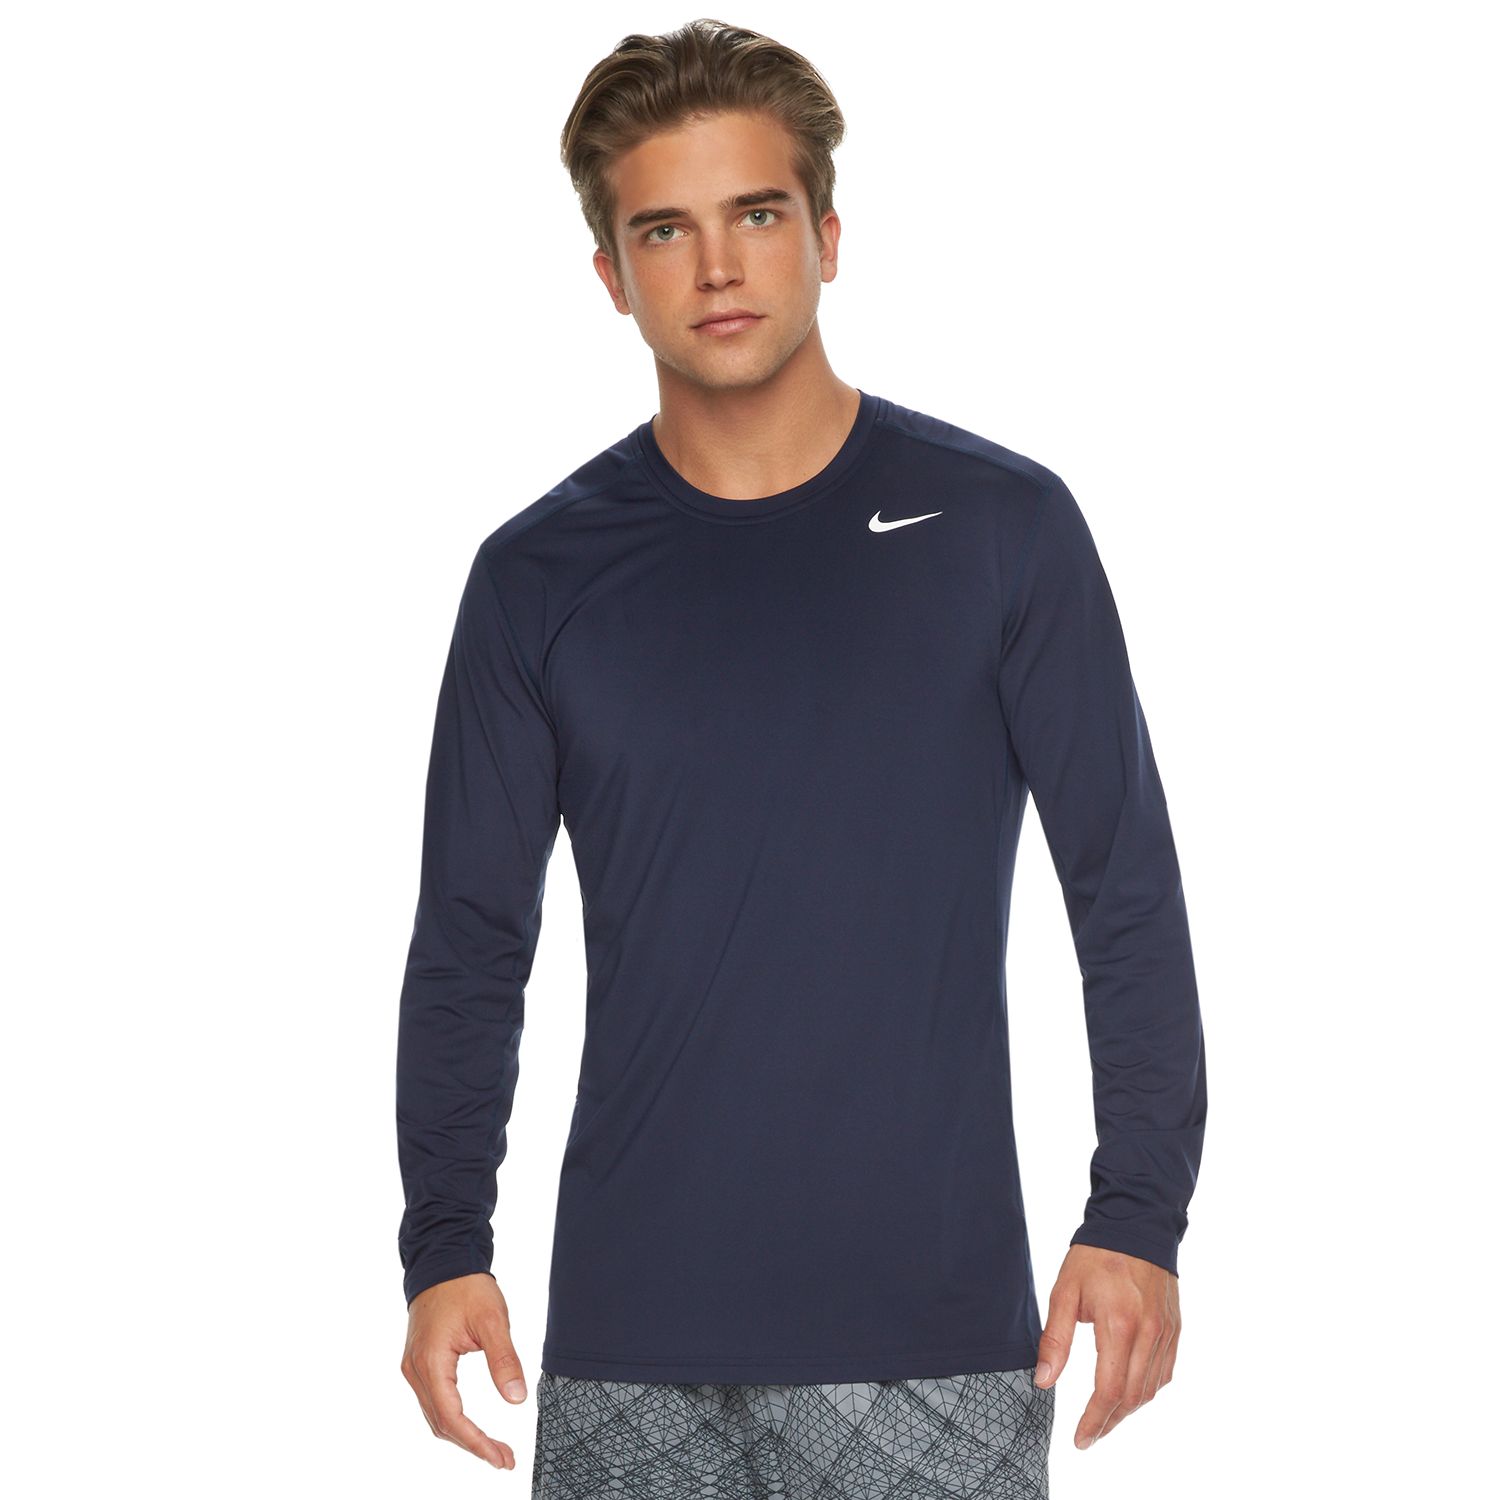 Nike Dri-FIT Base Layer Fitted Cool Top